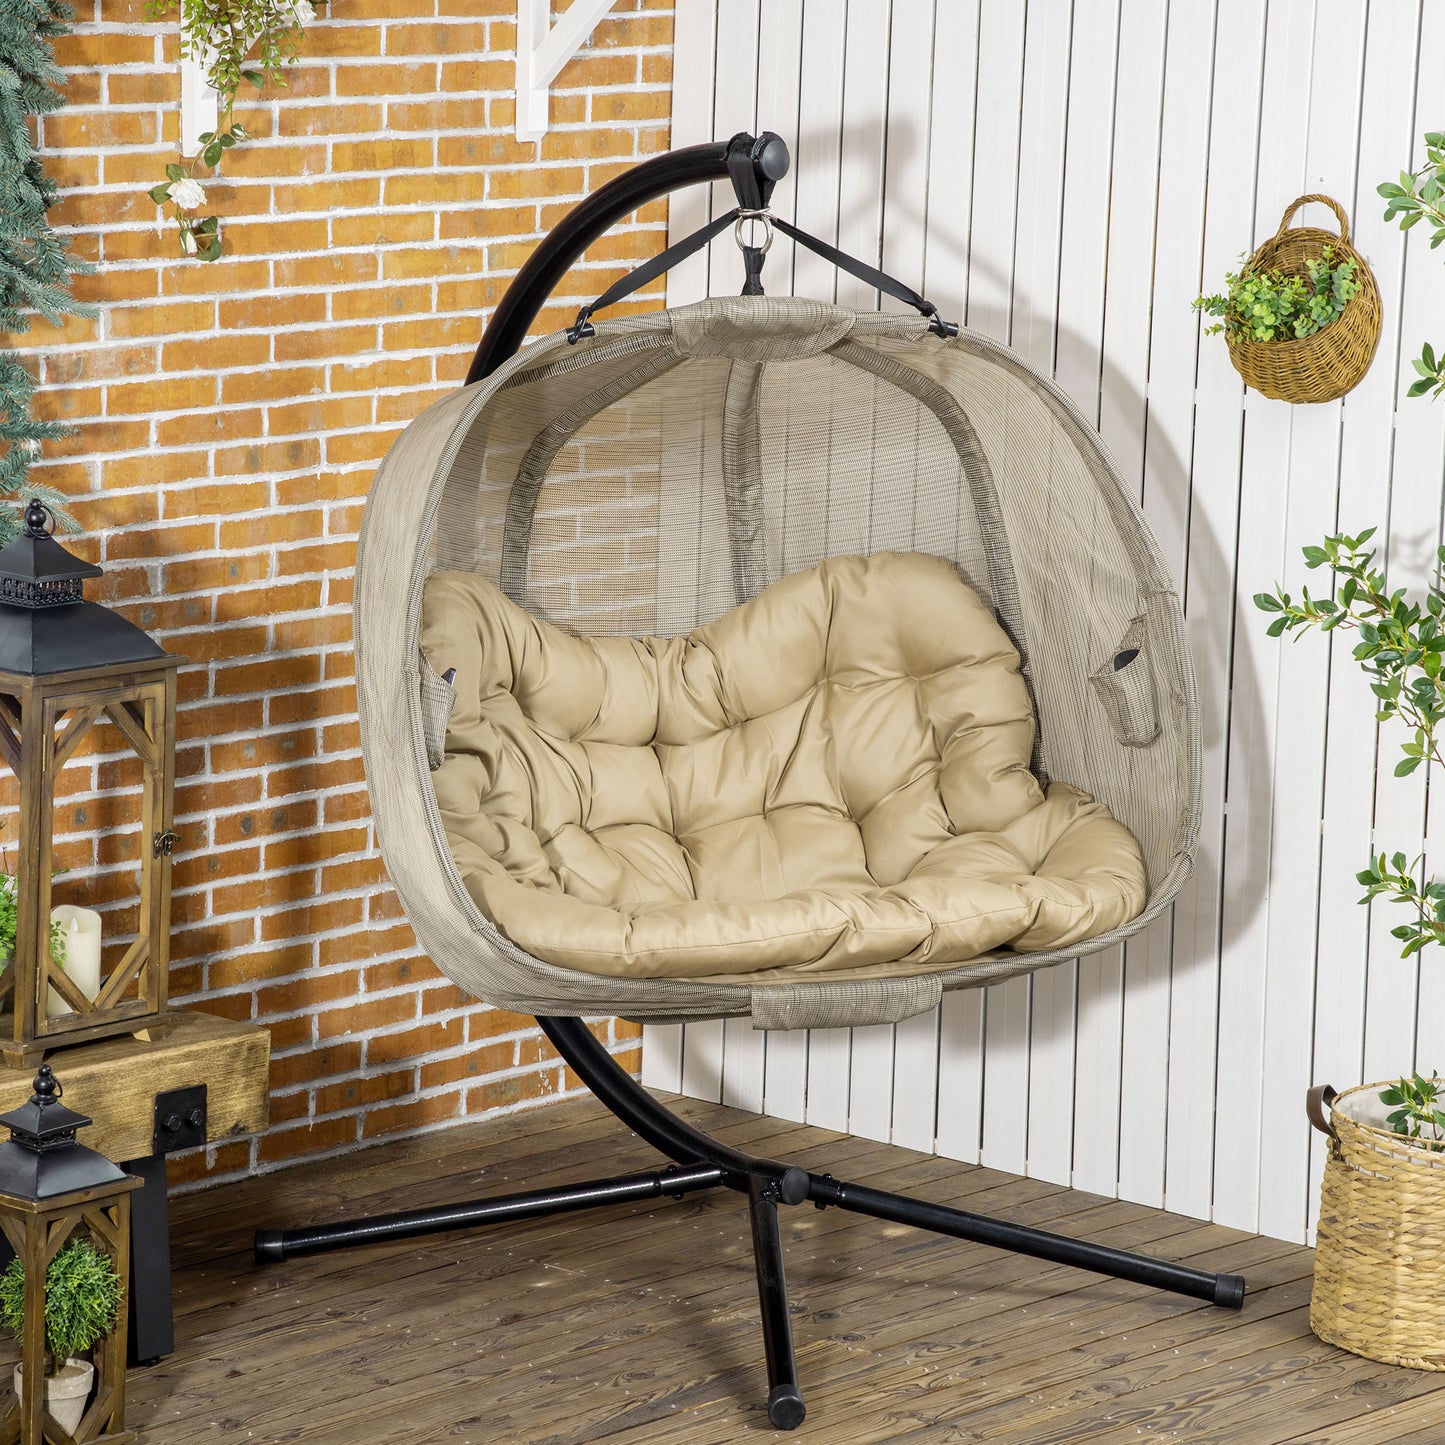 Outsunny Double Hanging Egg Chair 2 Seaters Swing Hammock Chair with Stand, Cushion and Folding Design, for Indoor and Outdoor, Brown